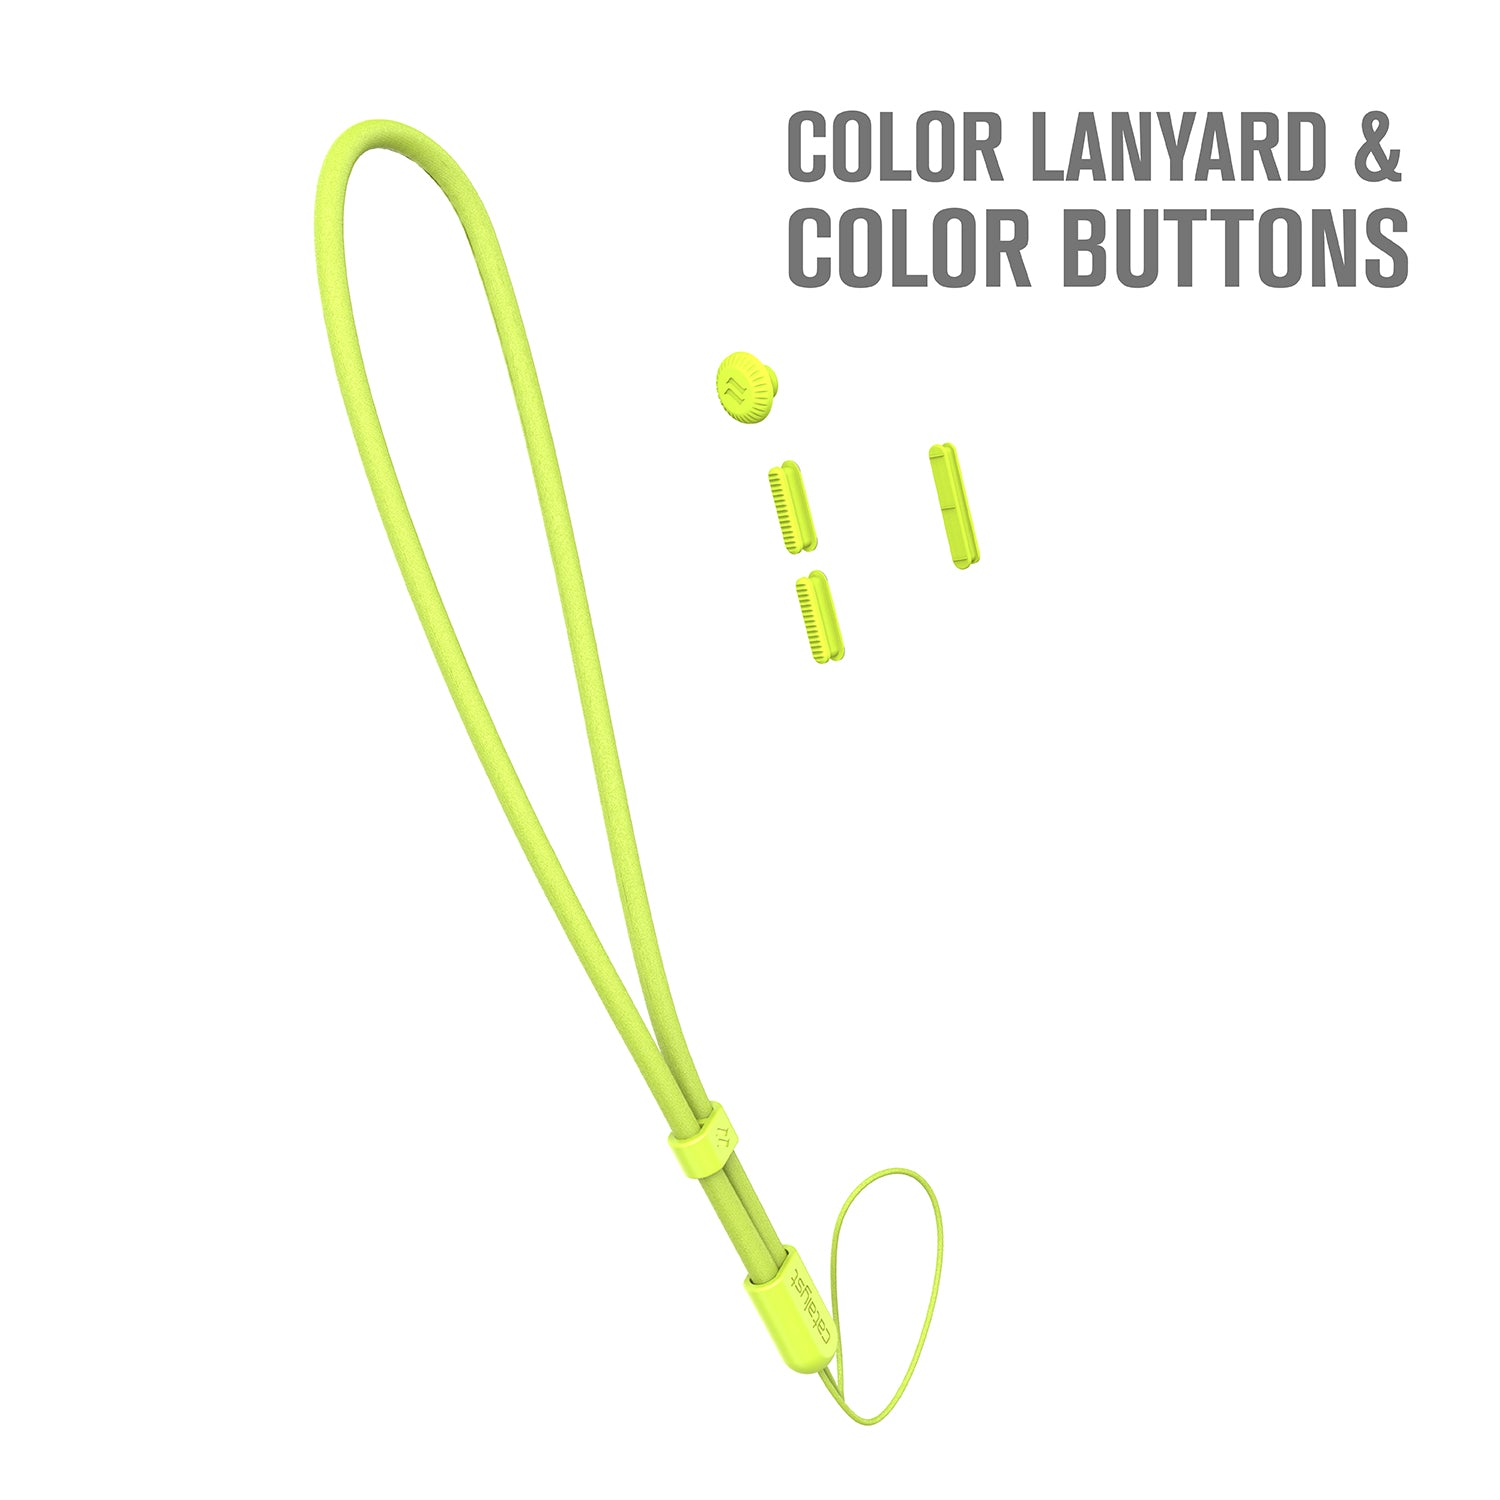 catalyst colored lanyard & buttons product itself neon yellow text reads color lanyard & color buttons